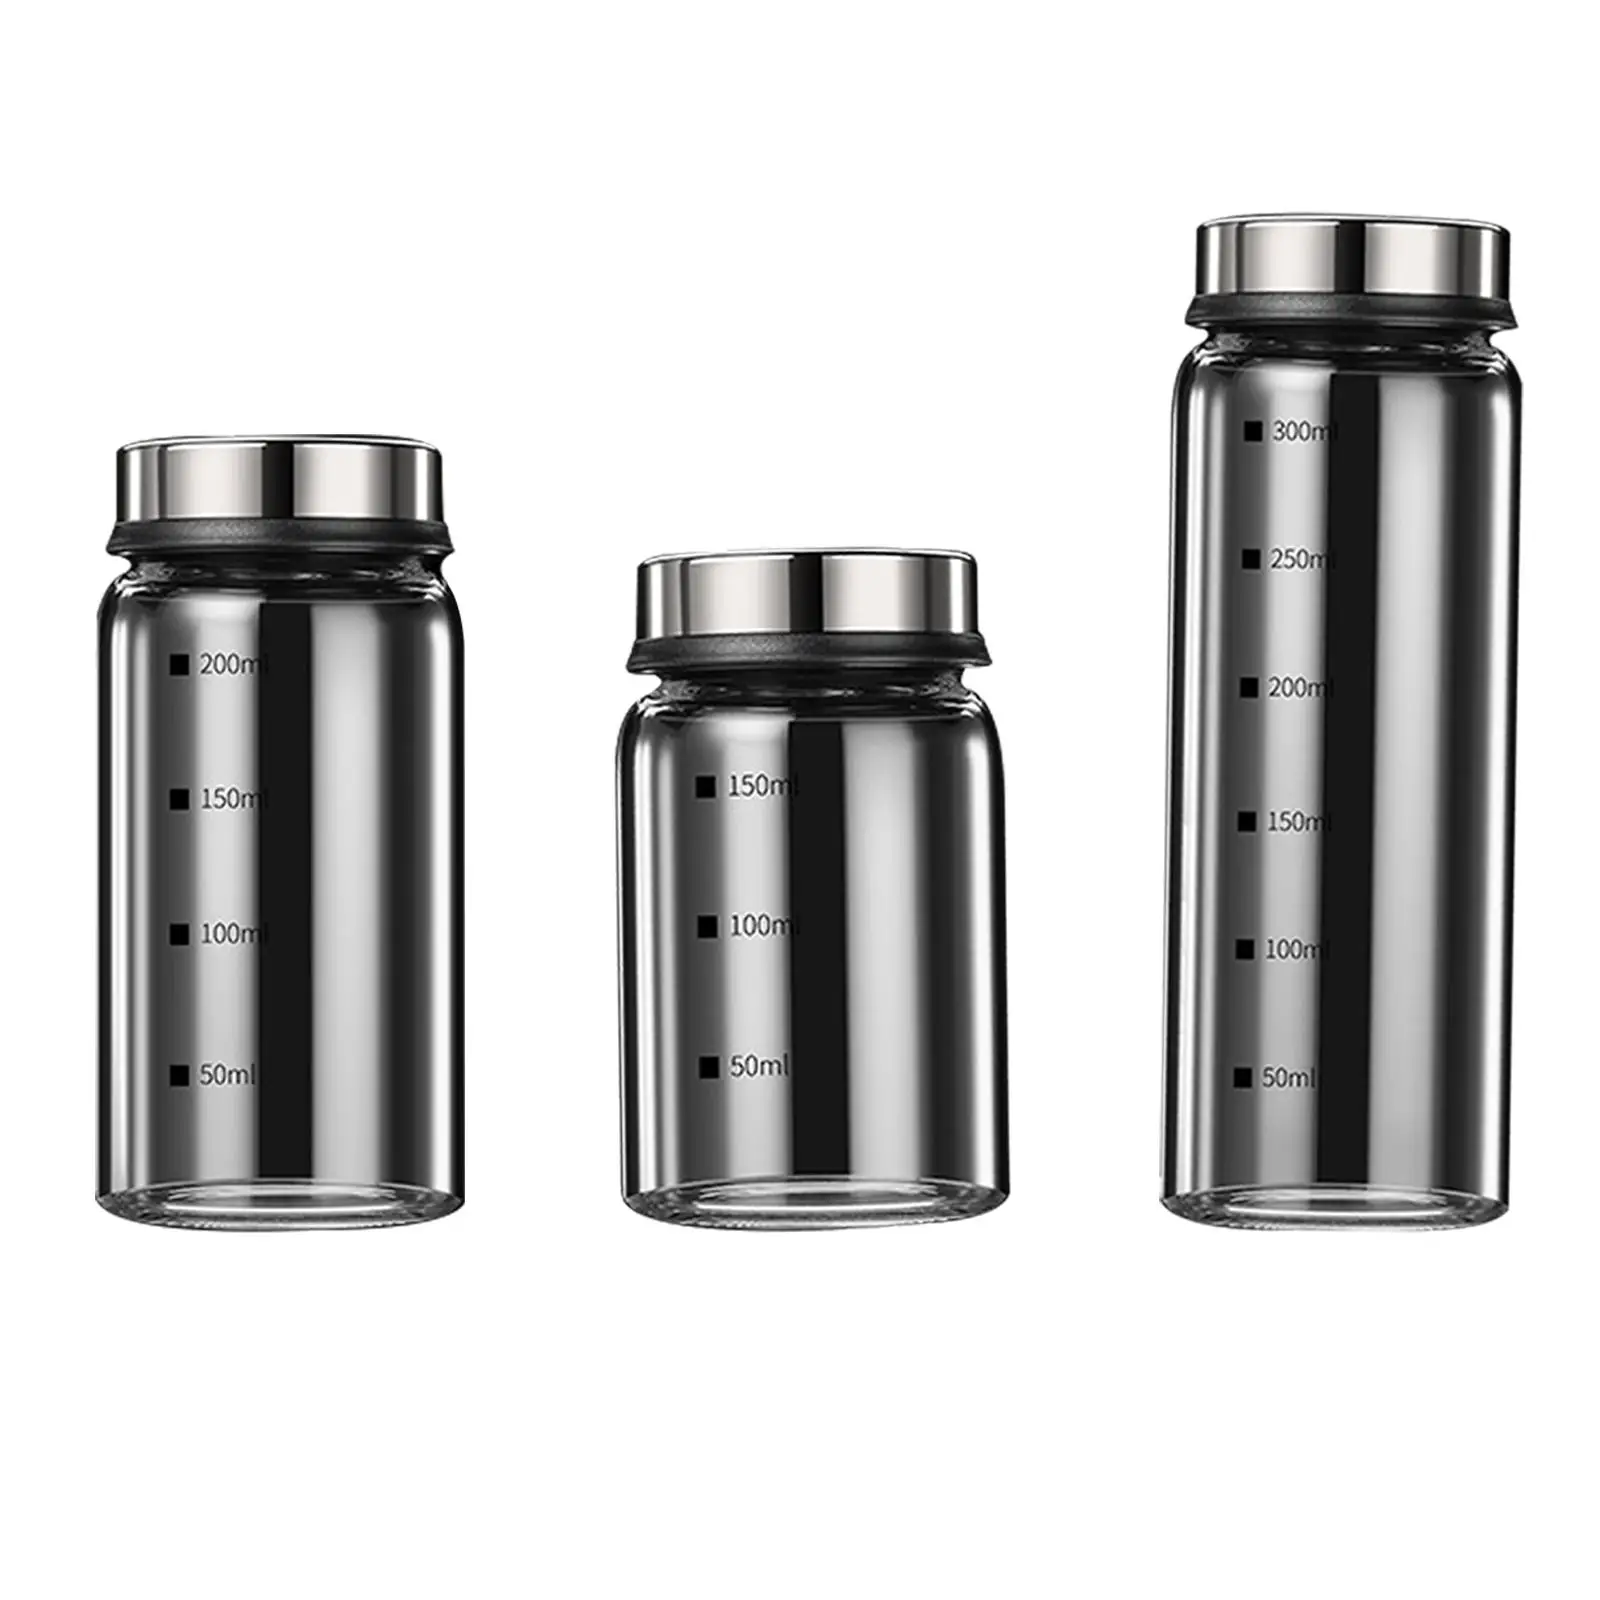 Seasoning Shaker Separable Stainless Steel Adjust Hole Reusable with Rotating Cover Spiral Seasoning for Pepper